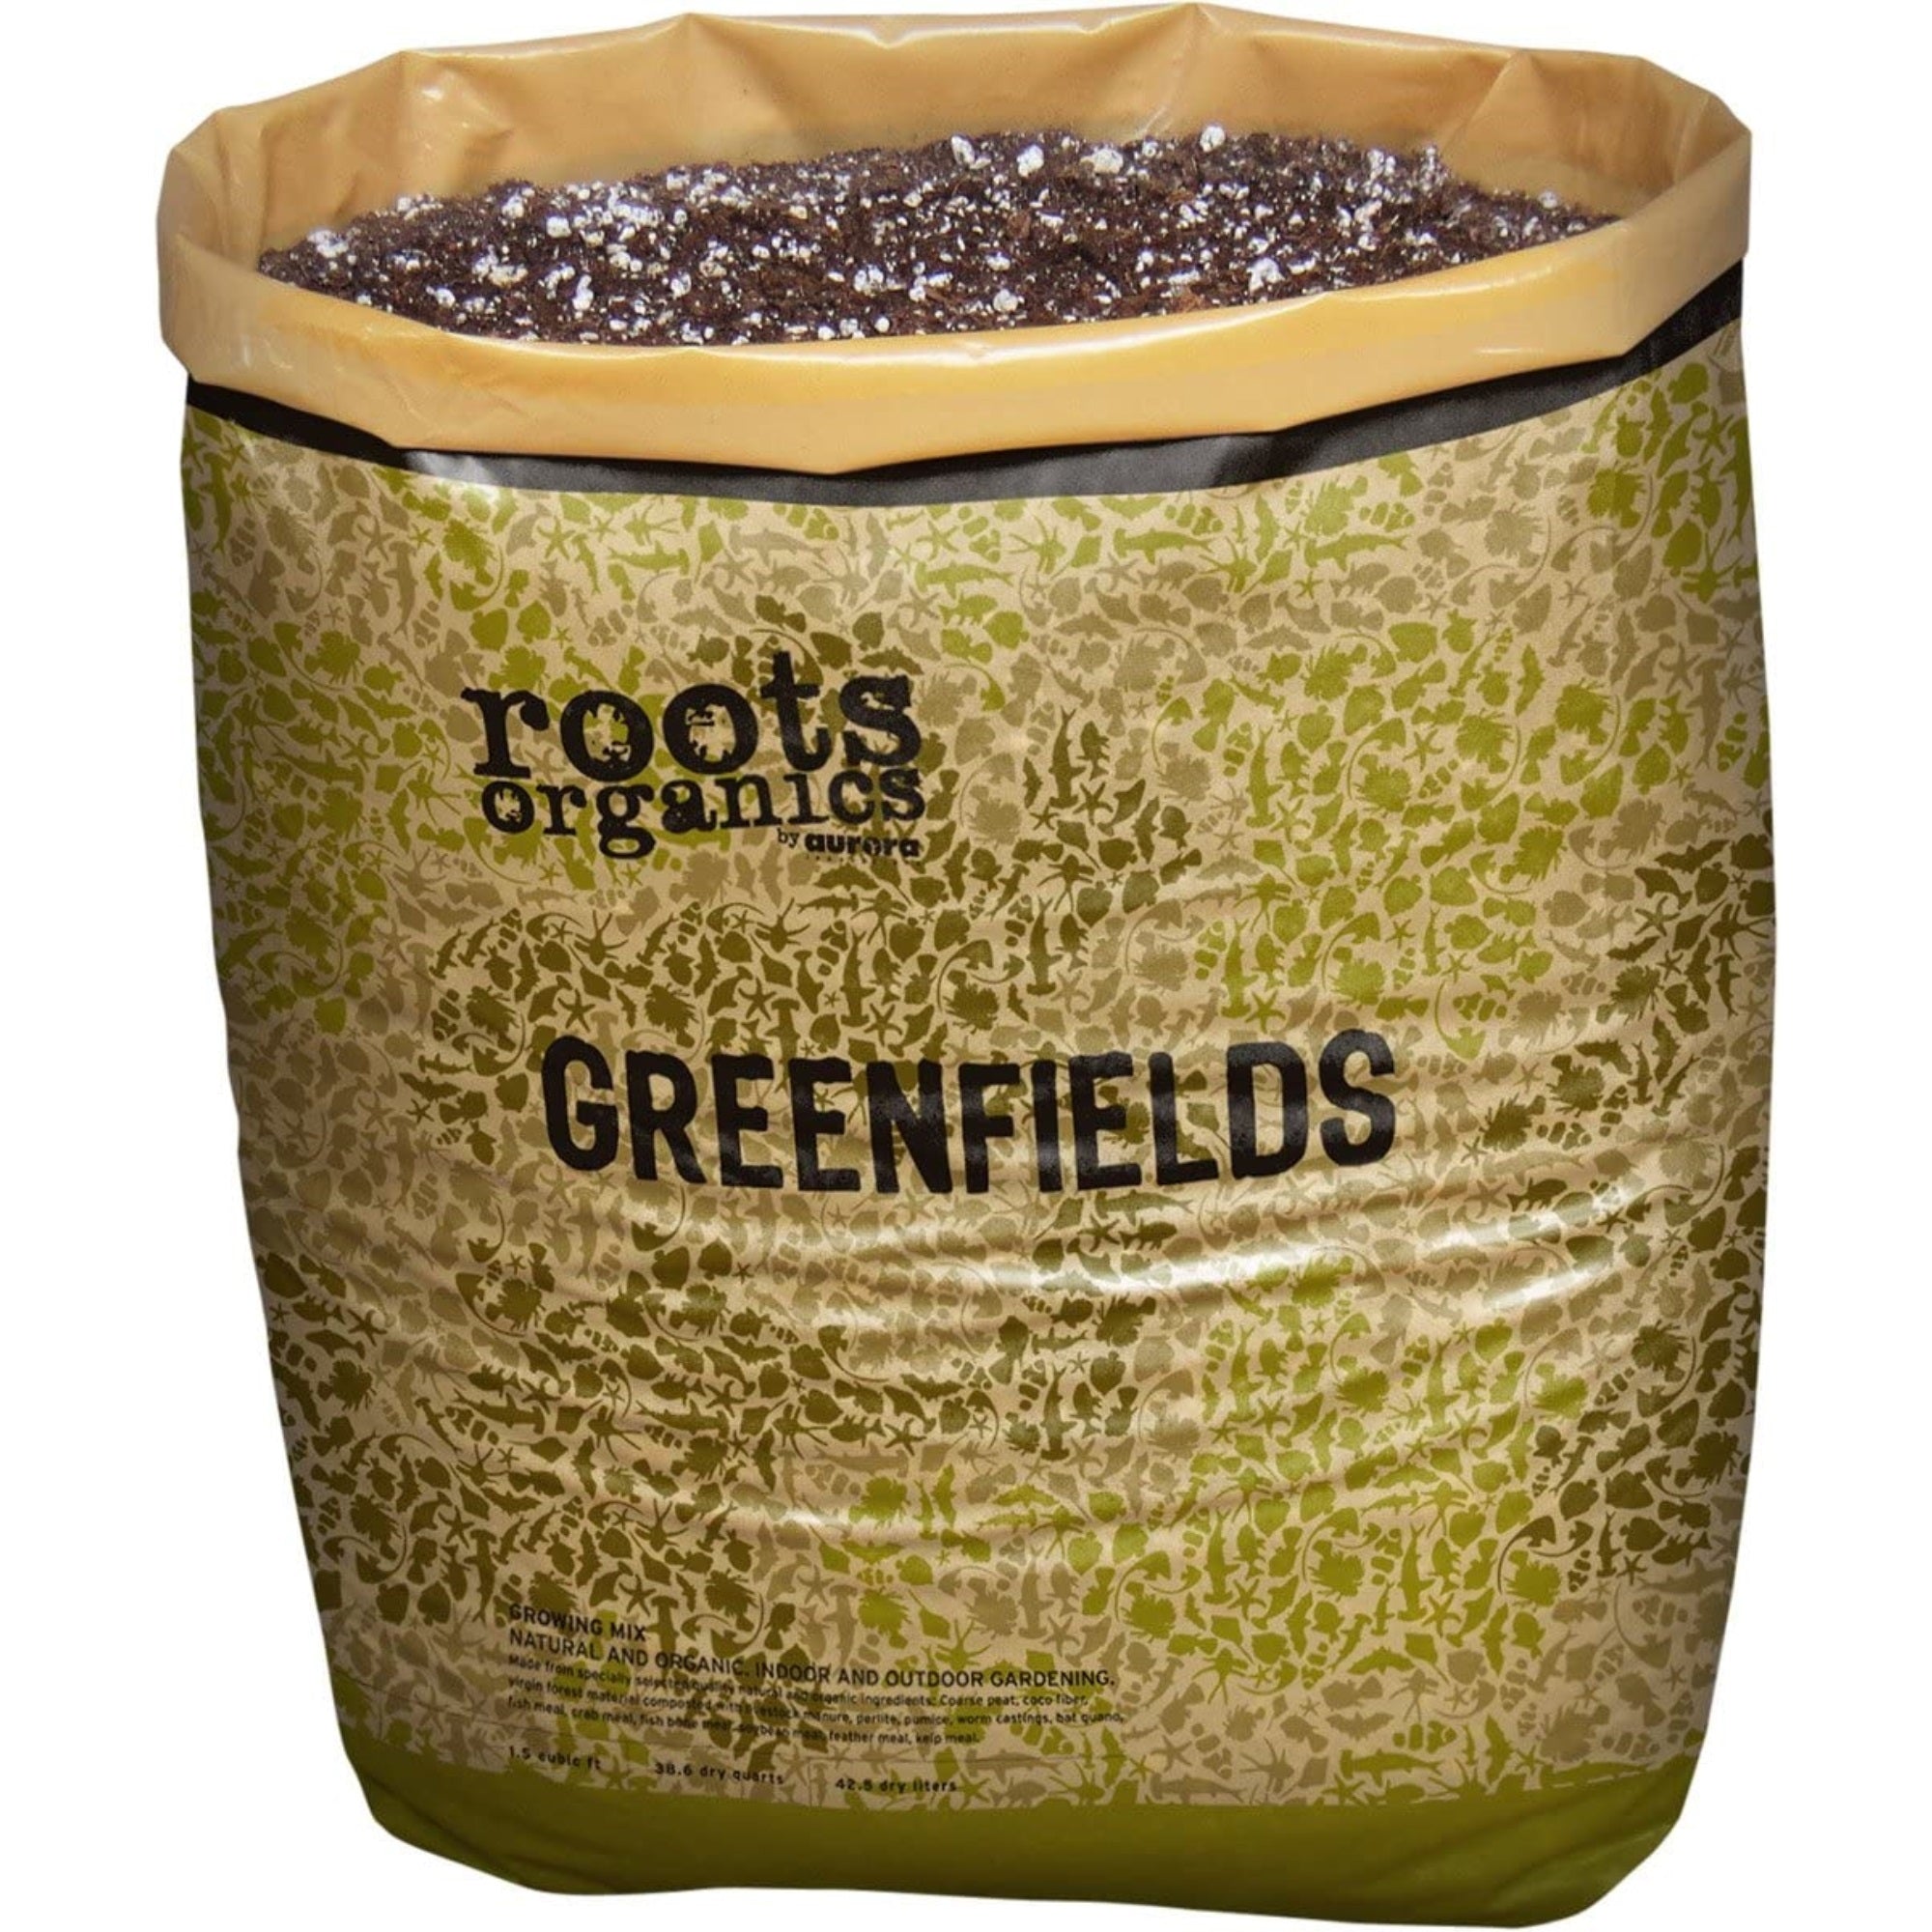 Roots Organics Greenfields, Organic Growing Media with Beneficial Mycorrhizae, Plant-in-Bag, 1.5 Cubic Foot